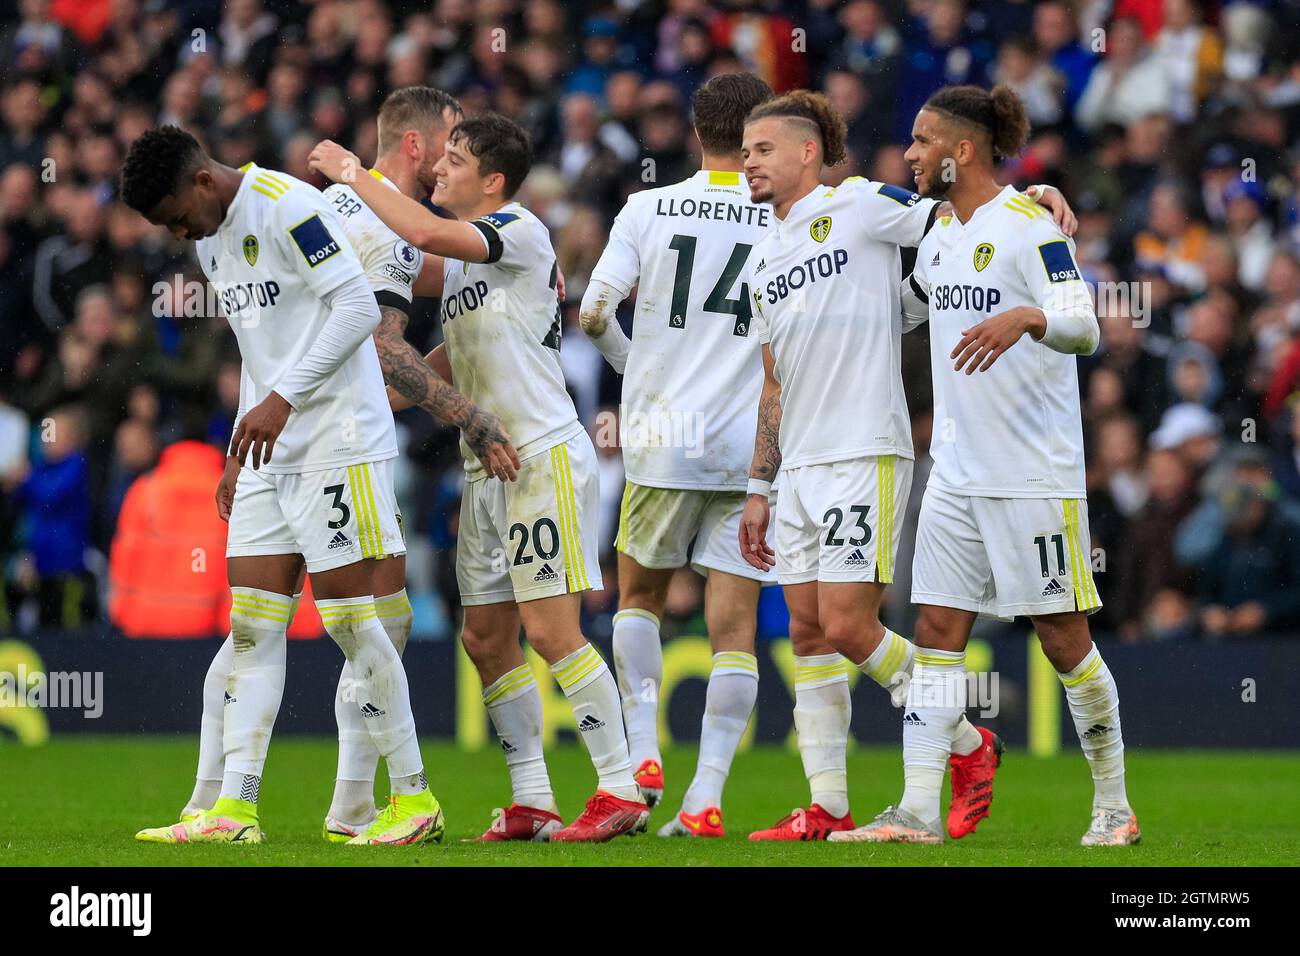 The Leeds United players celebrate winning the game Stock Photo